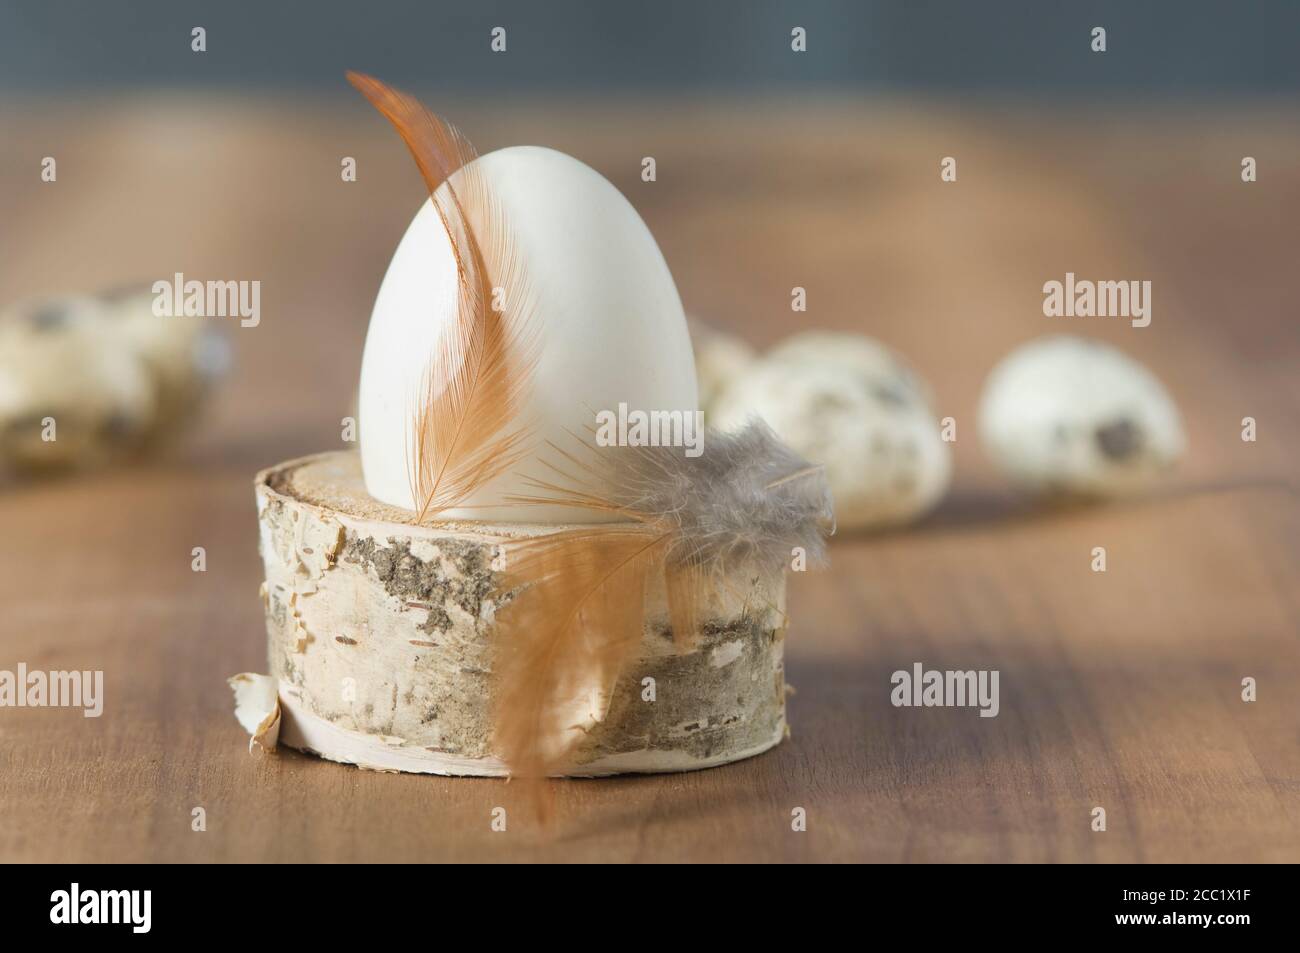 Easter eggs with Quail egg, feather on wood Stock Photo